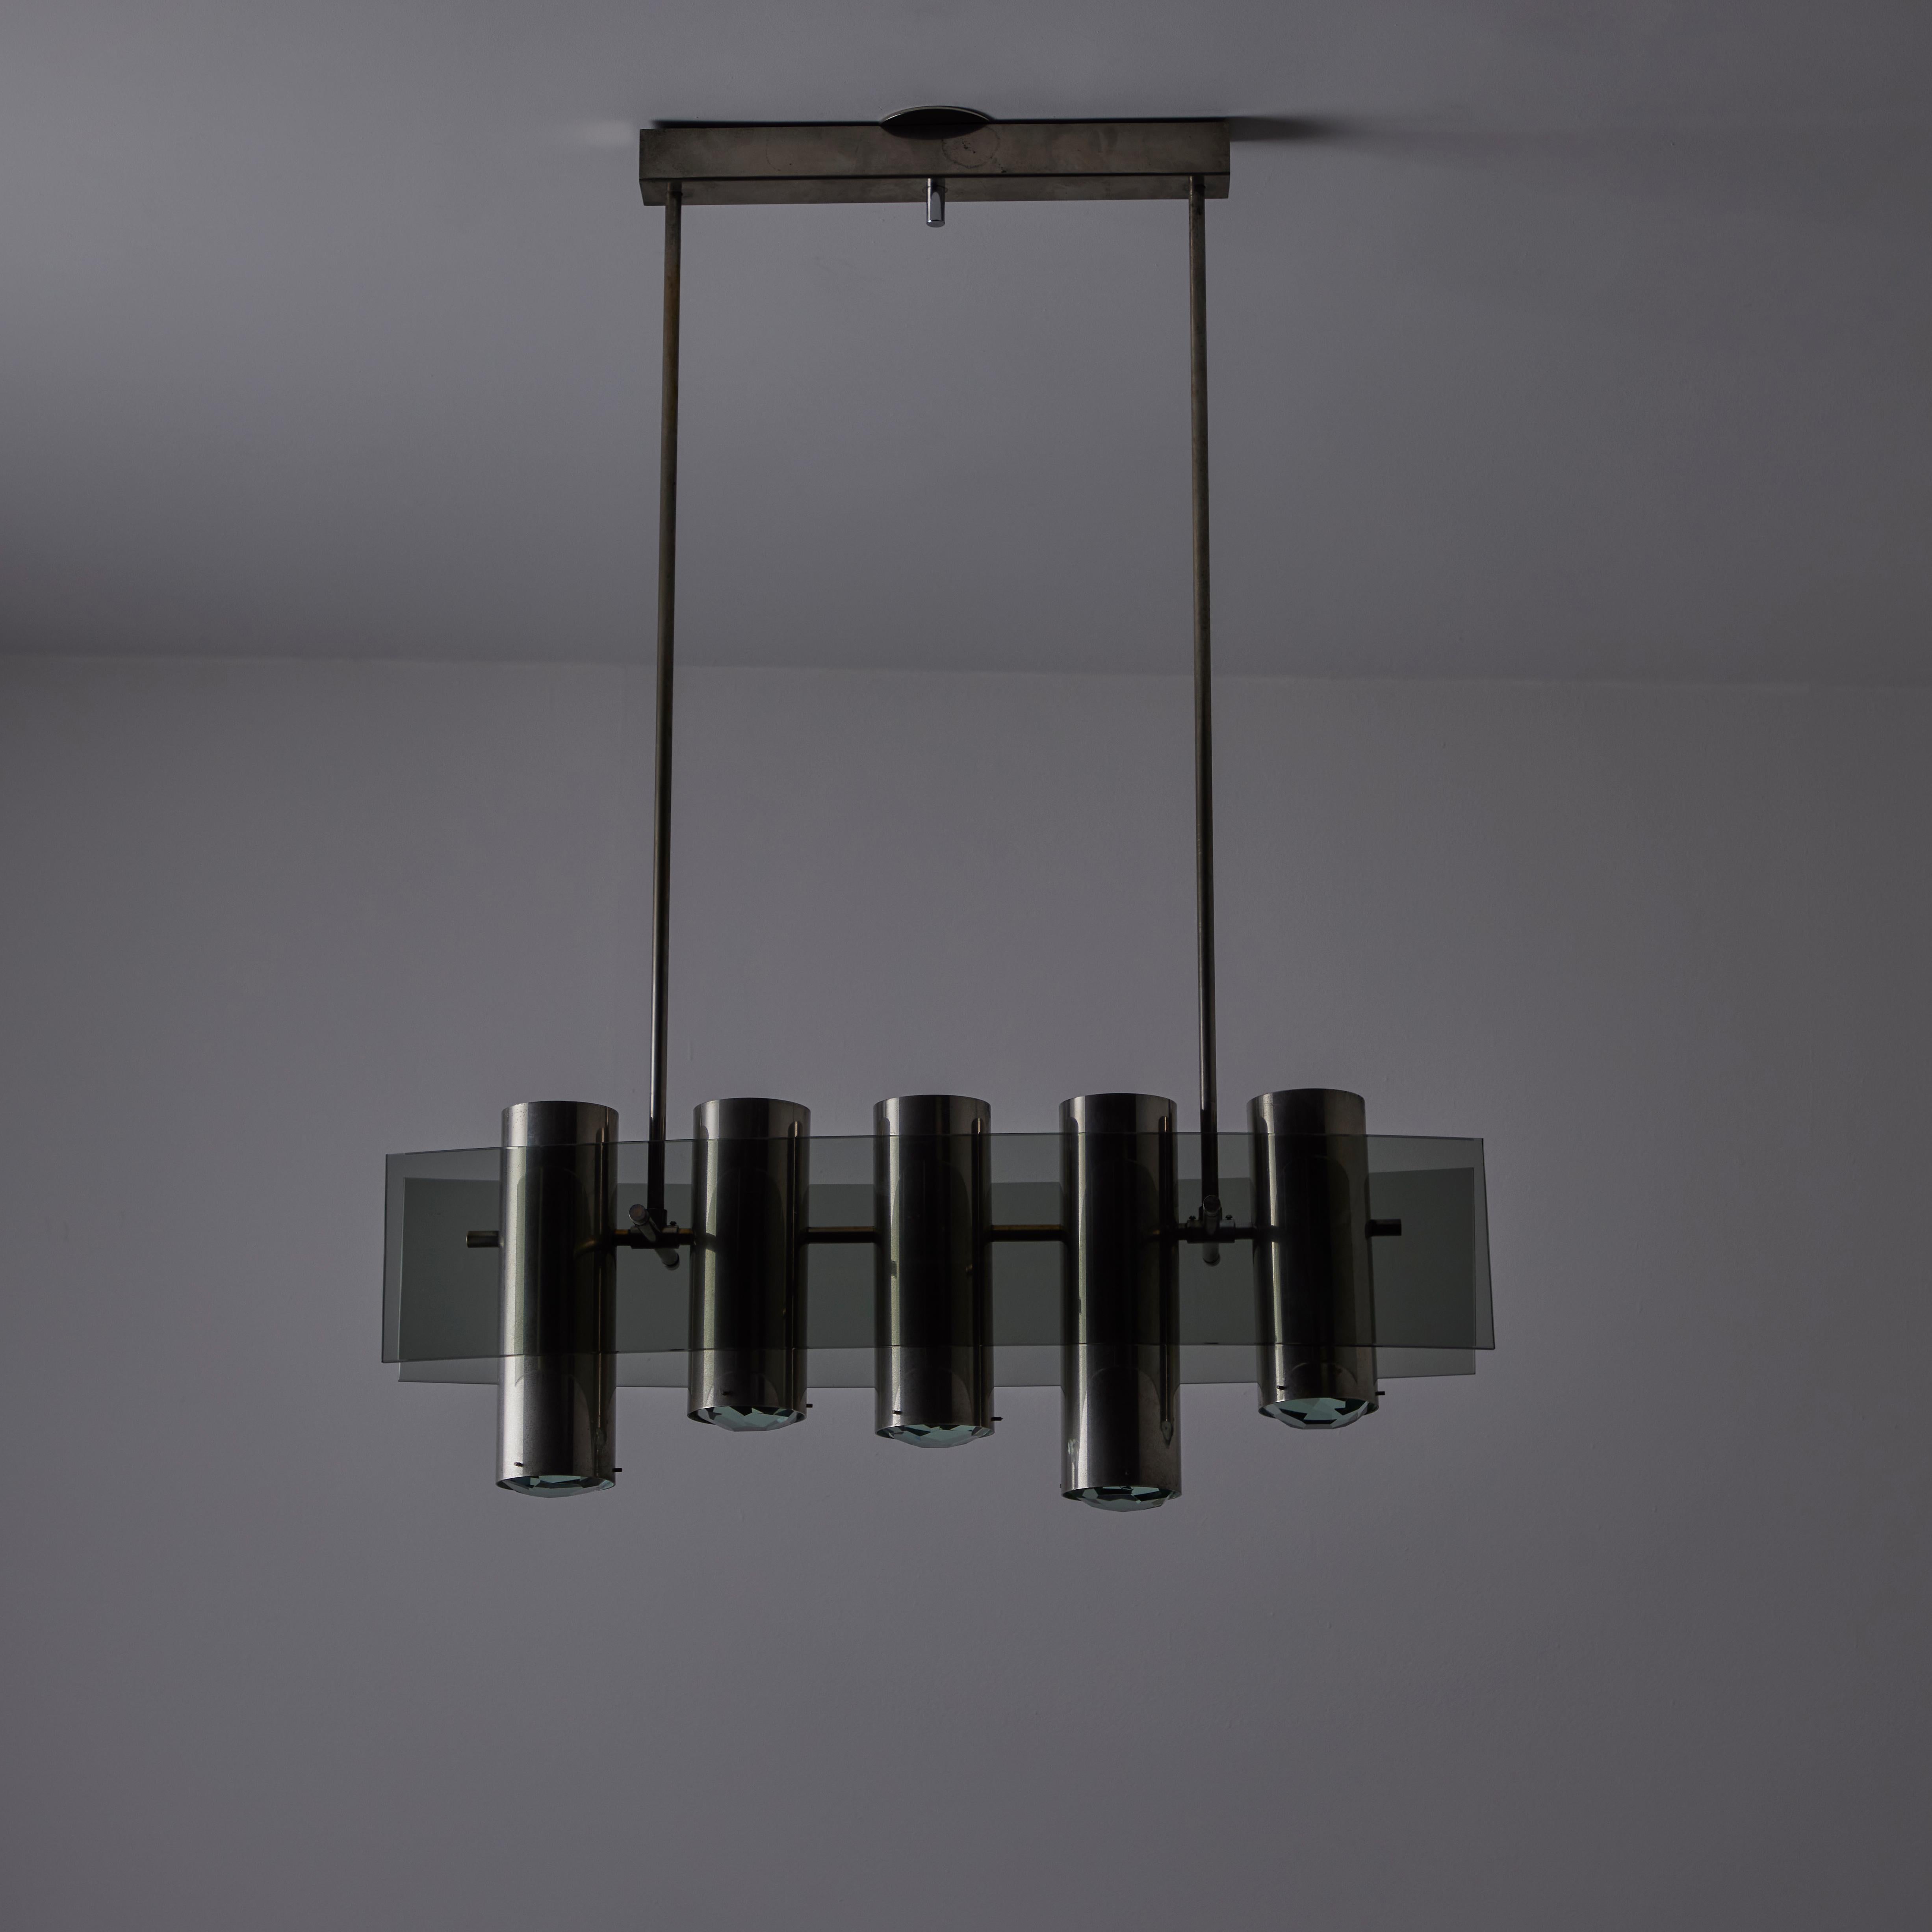 Model 2177 Chandelier by Max Ingrand for Fontana Arte. Designed and manufactured in Italy, in 1965. A rare linear chandelier comprising of five chrome cylinder spotlights and two curved panels of smoked glass. The cylinders each hold geometric cut